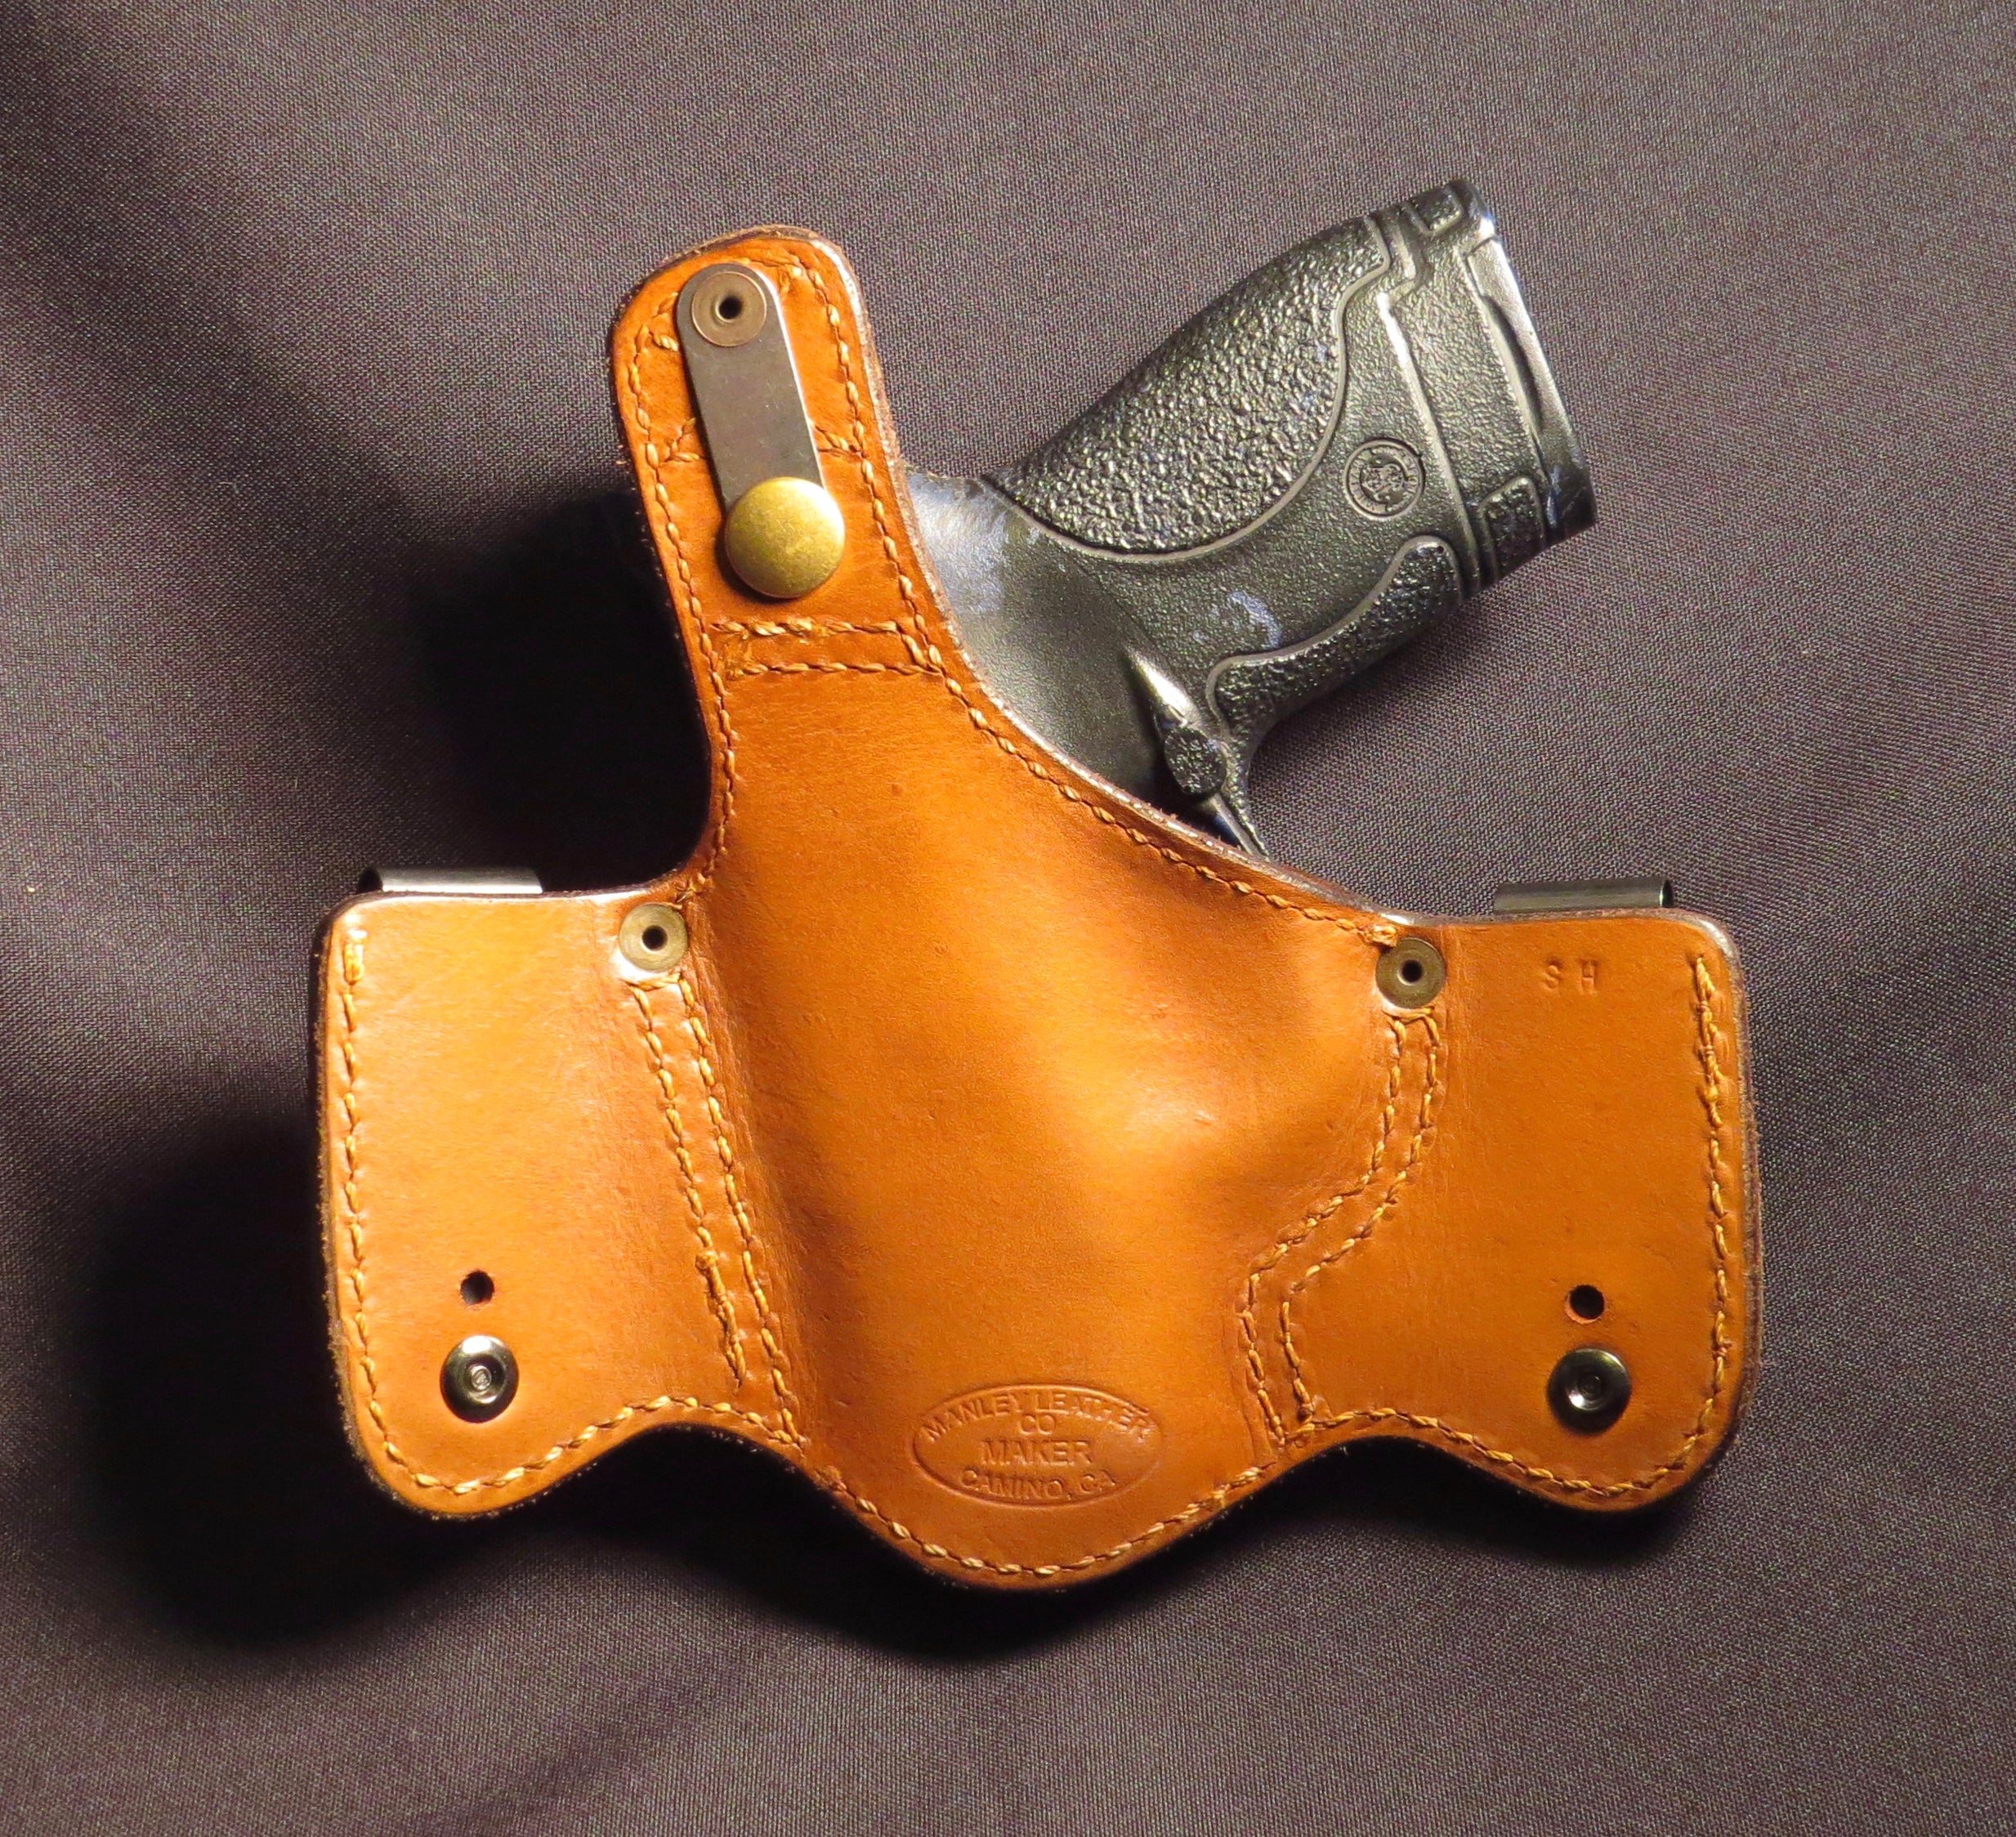 S&W M&P Sheild IWB or OWB Leather Holster with Thumb Break